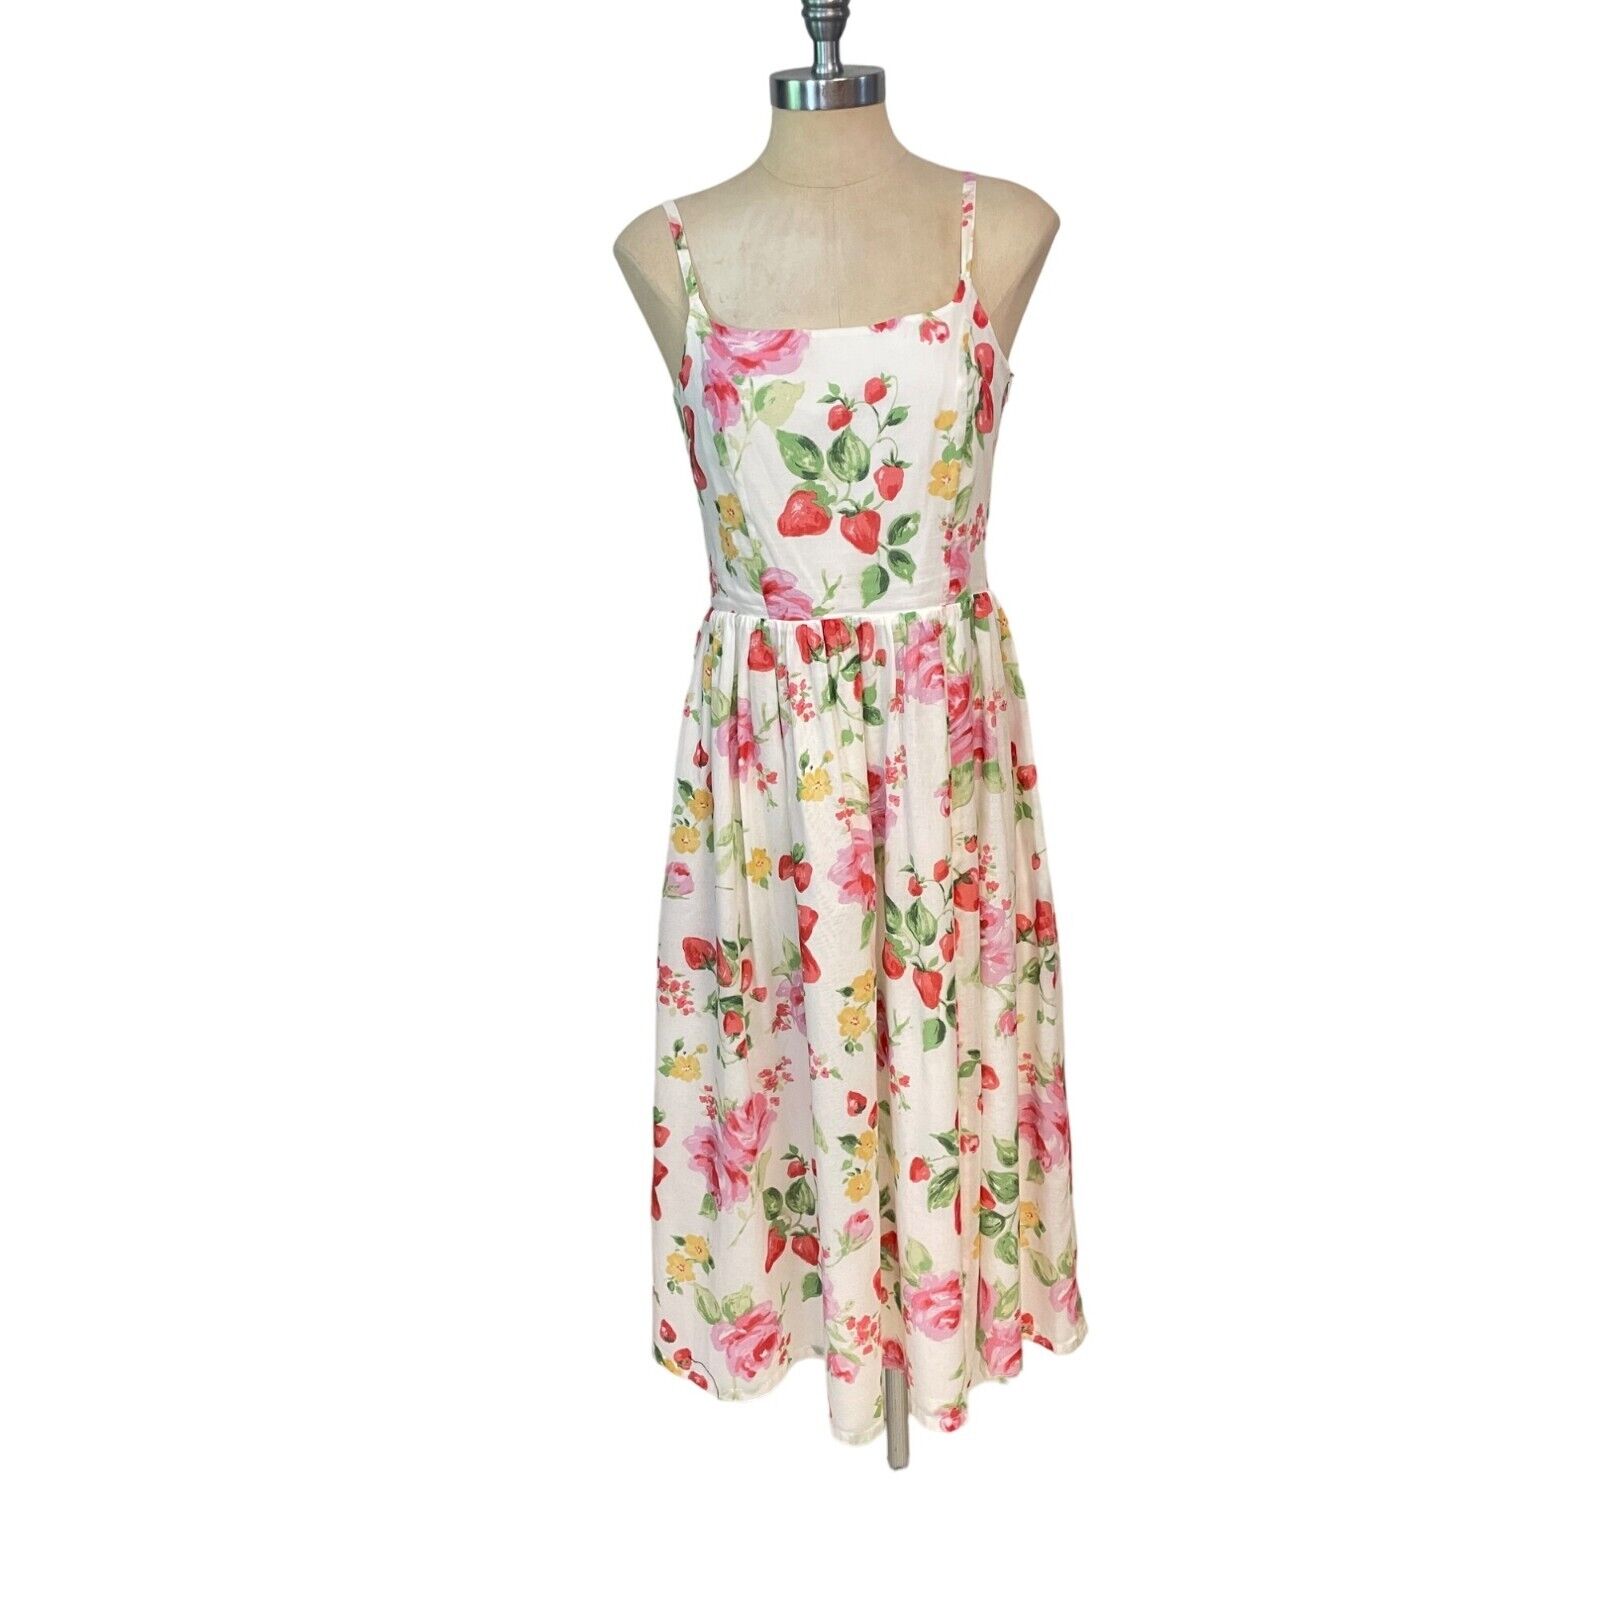 Vintage Laura Ashley floral strawberry Dress US Small